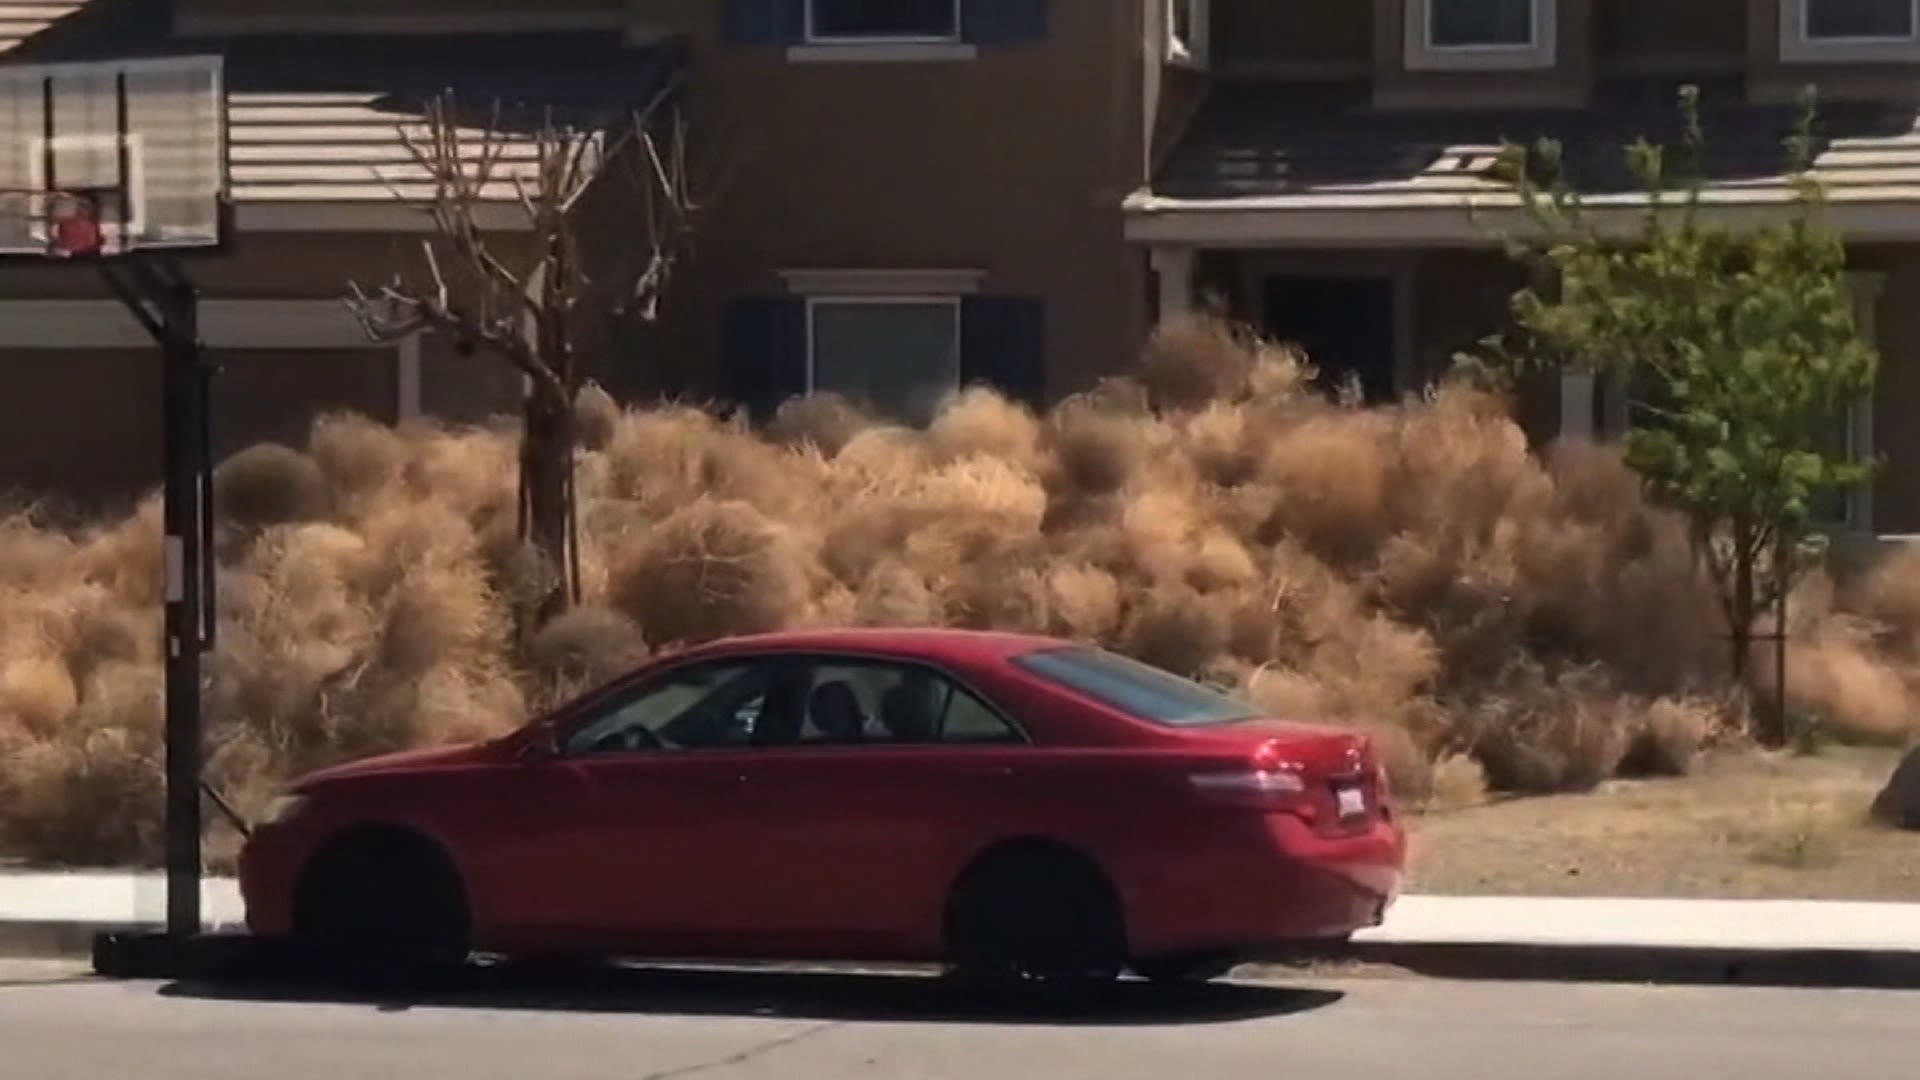 Volkswagen-sized tumbleweed set to take over Southern California – New York  Daily News